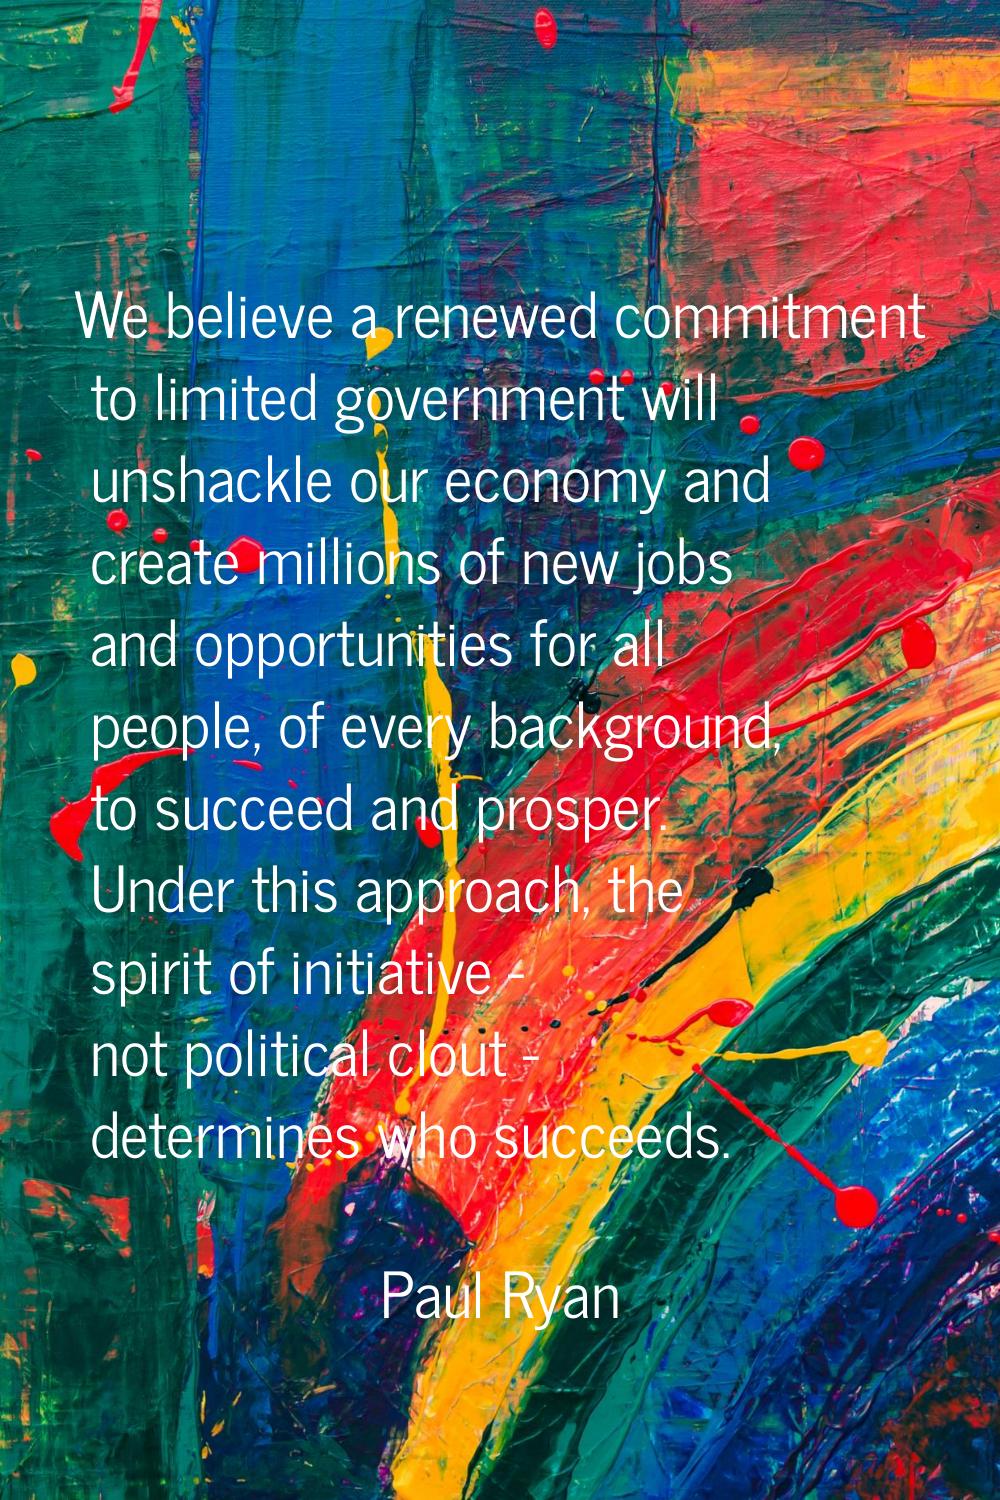 We believe a renewed commitment to limited government will unshackle our economy and create million